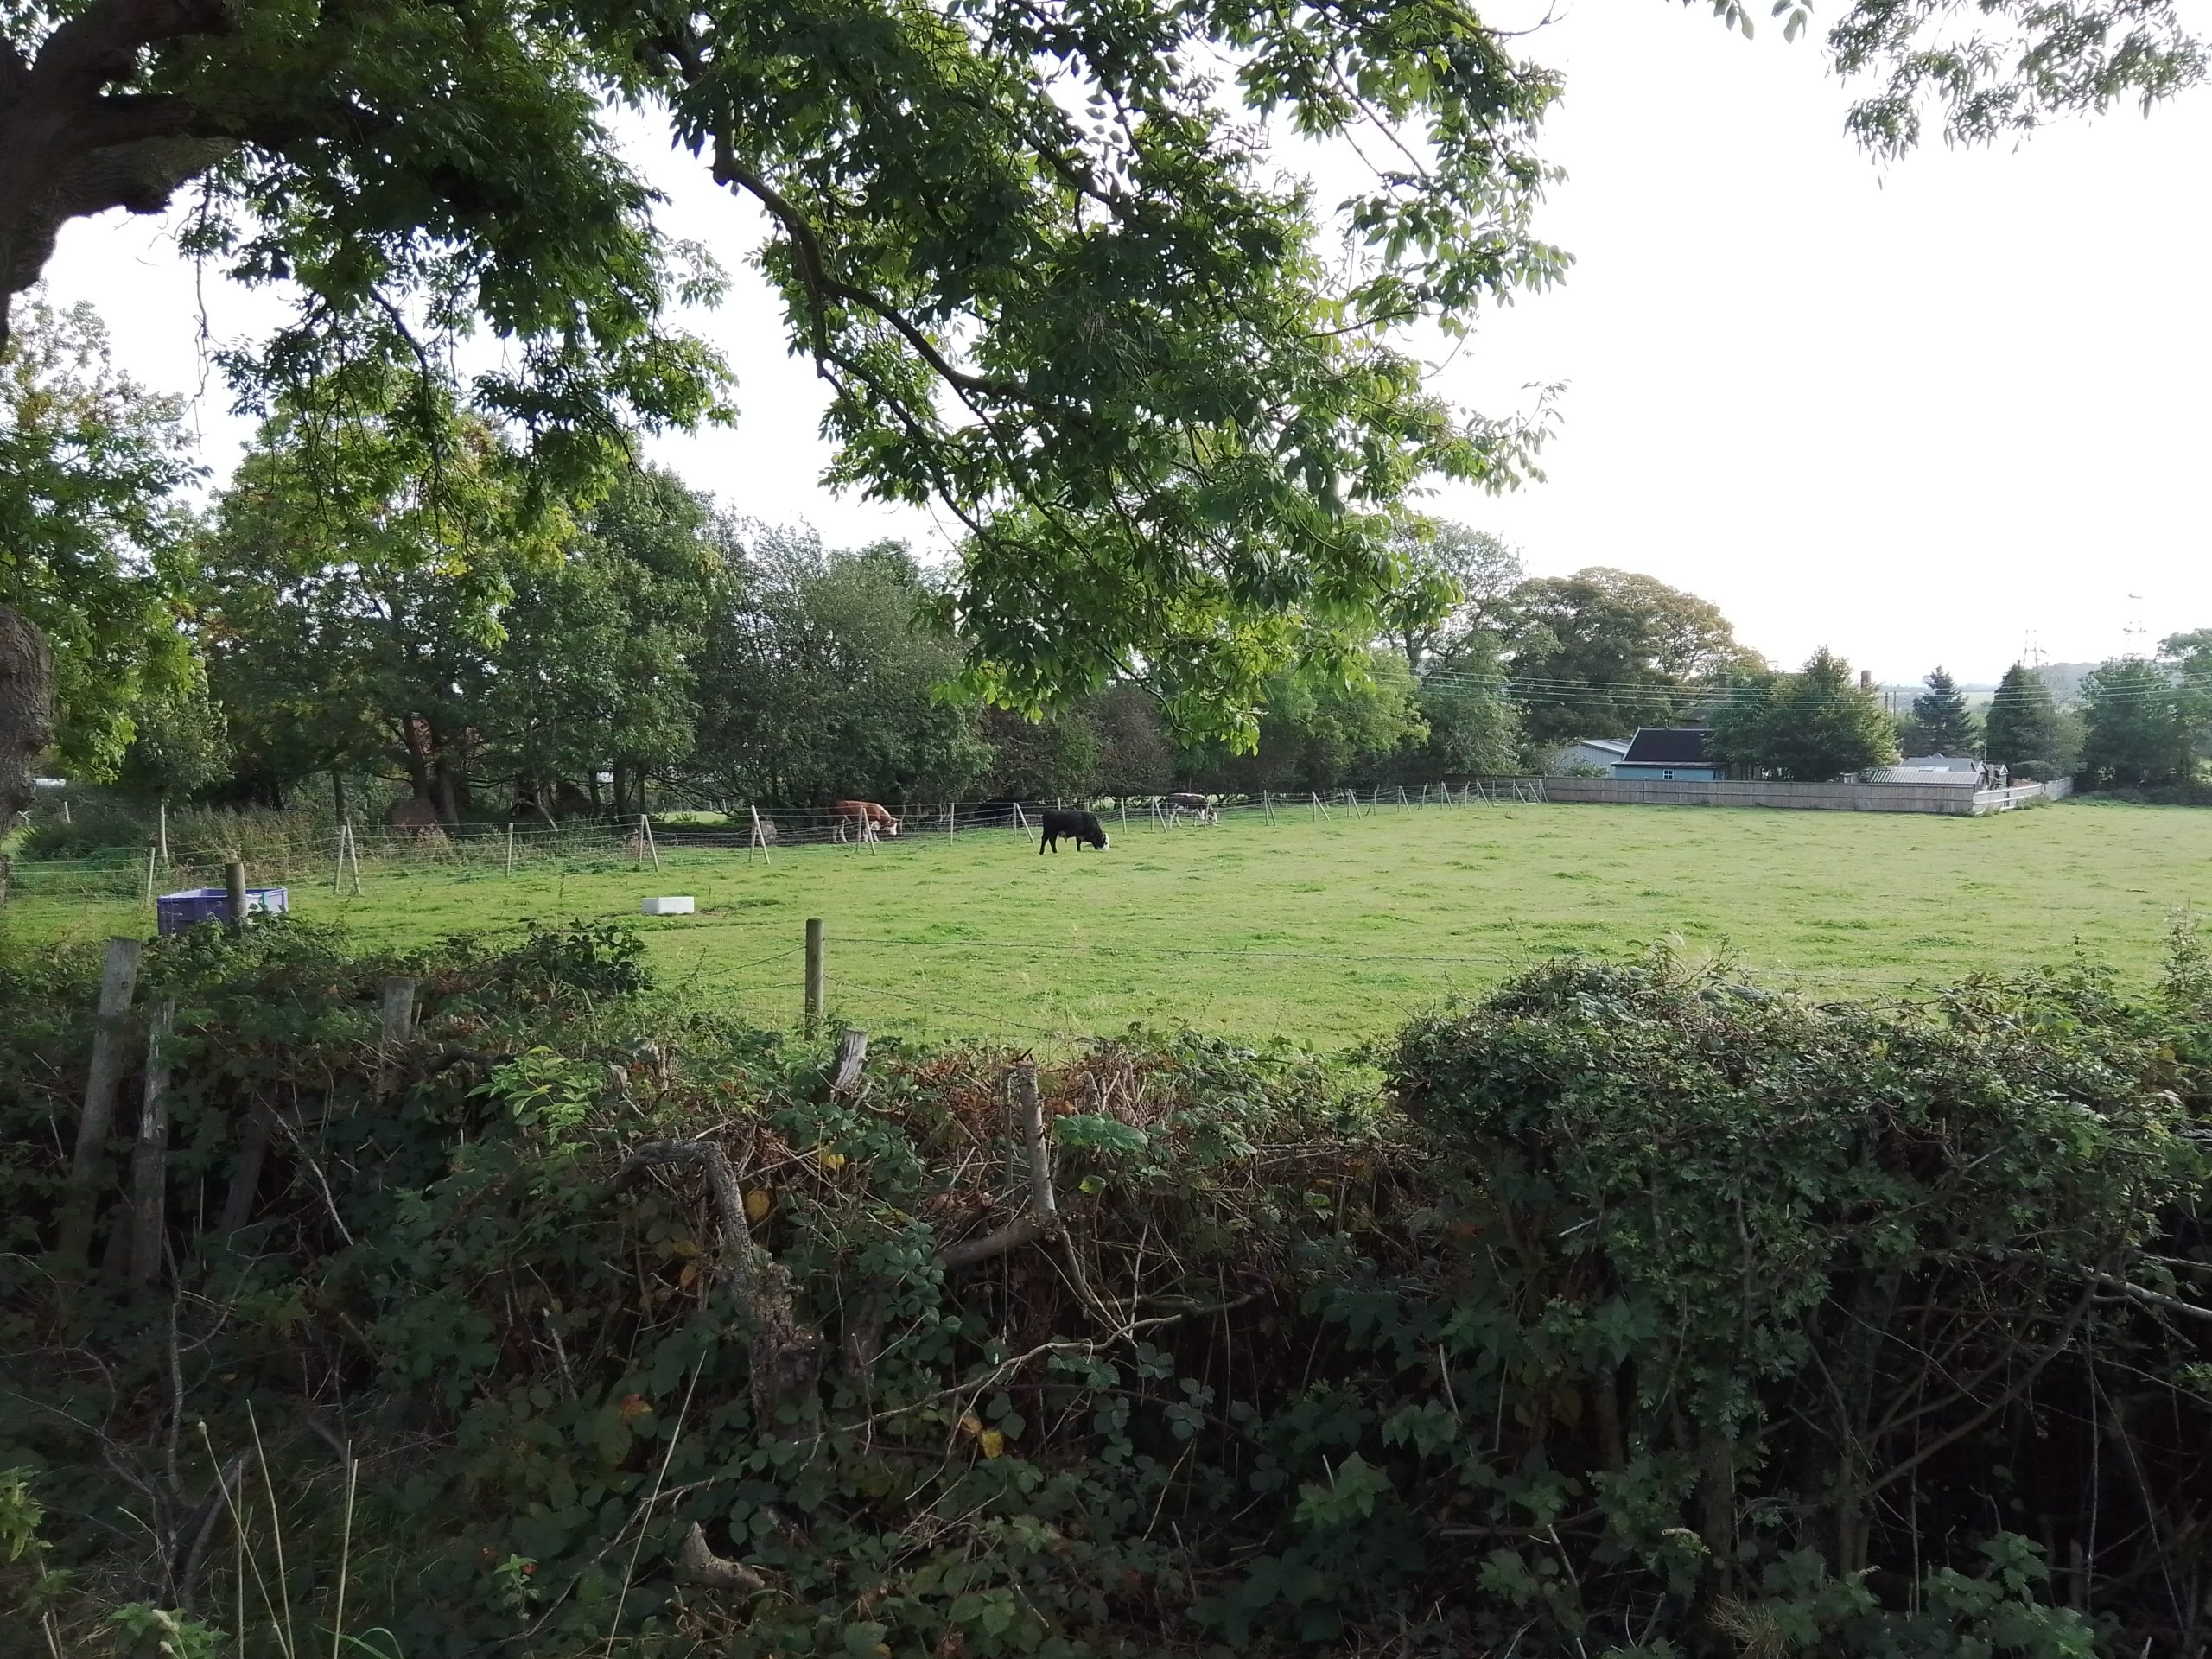 Cows in a field at Calow